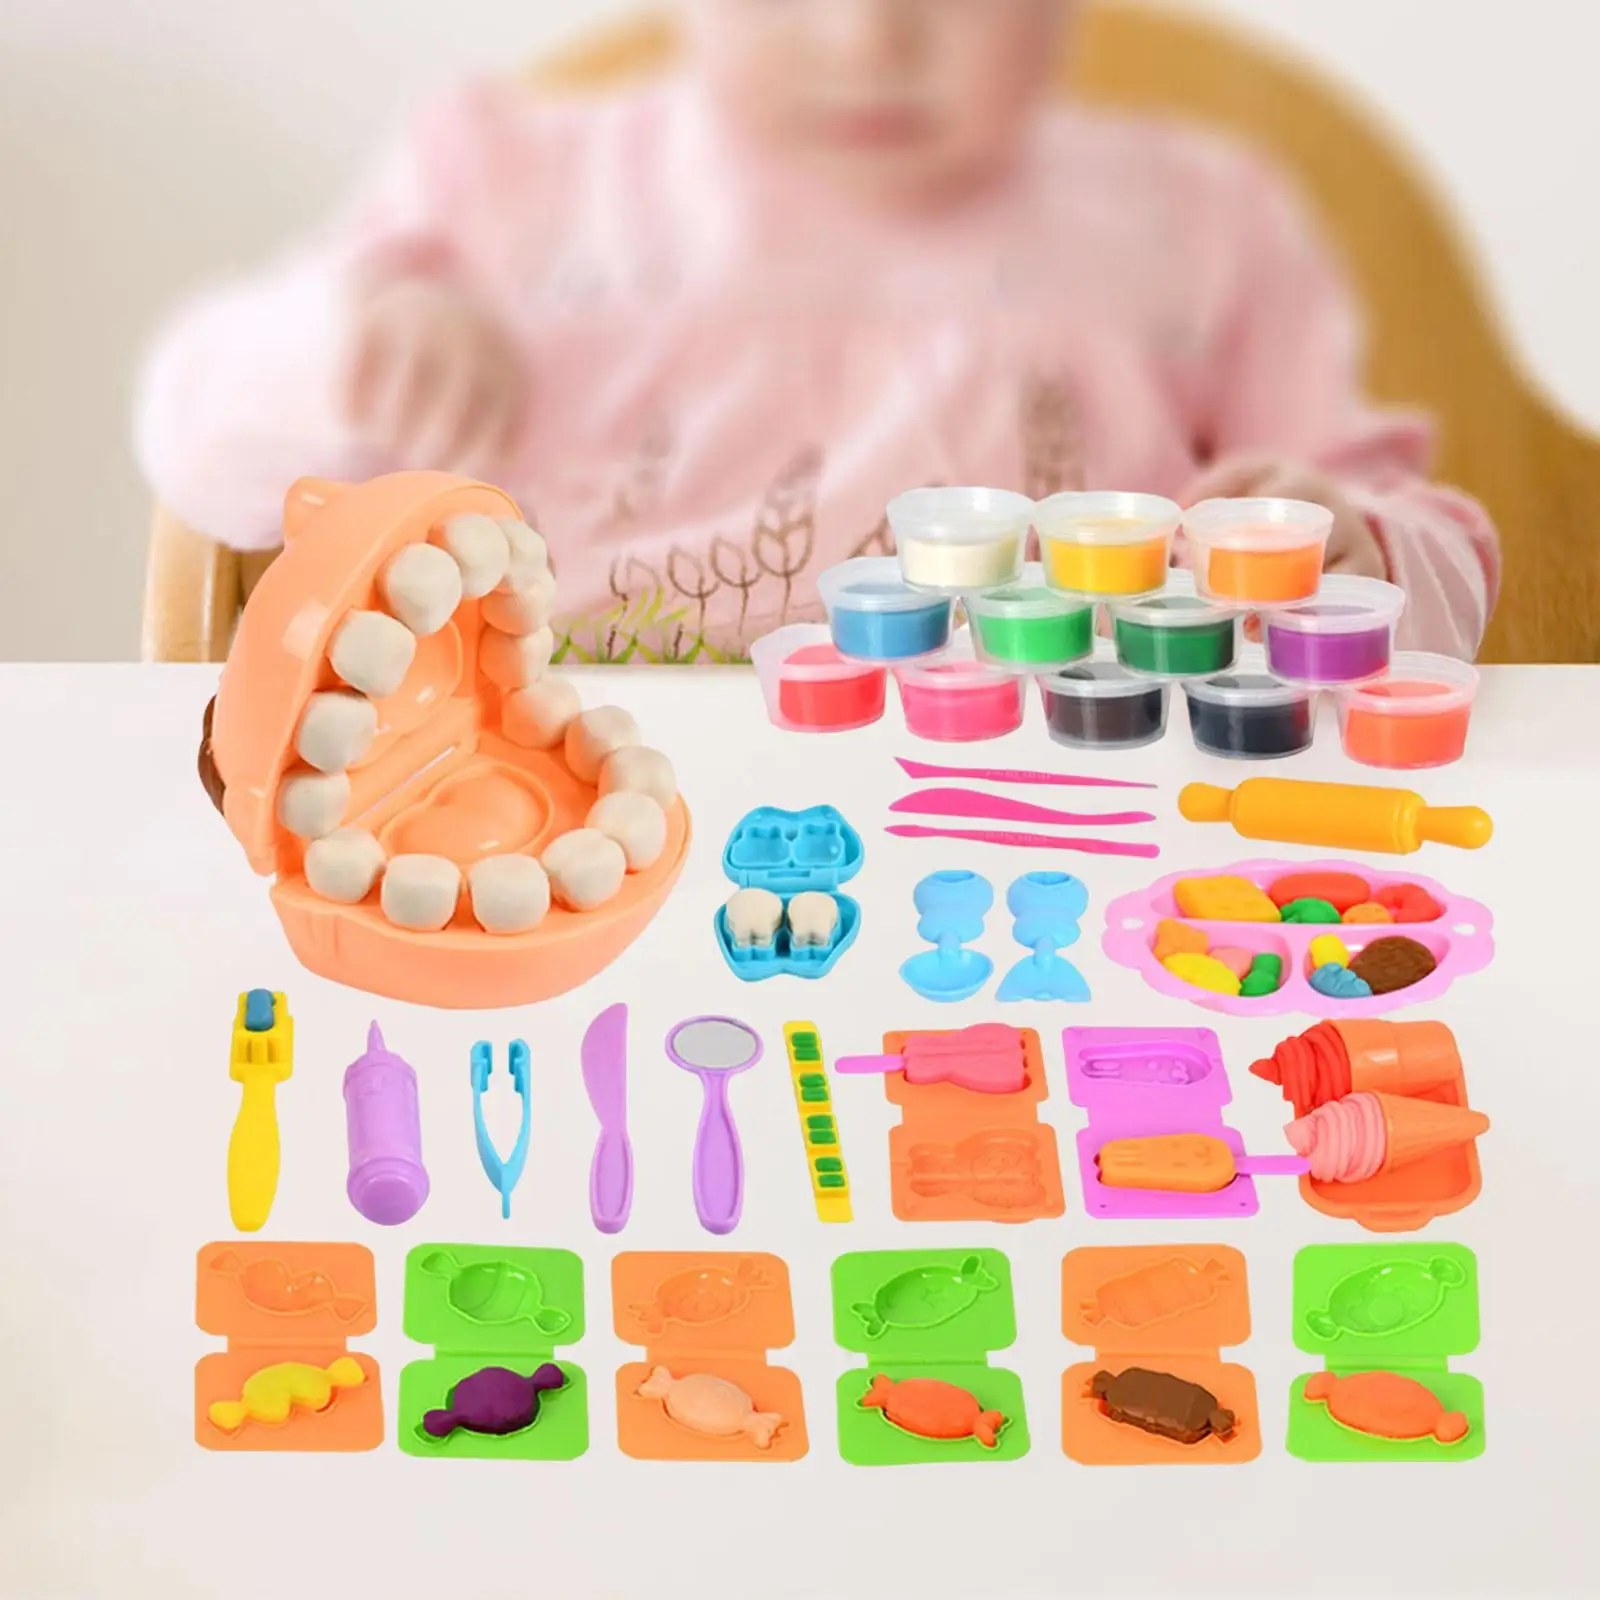 Modeling Clay Set 12 Colors Educational Pretend Play DIY Models Art Crafts with Accessoires for Girl Toddlers Boys Birthday Kids